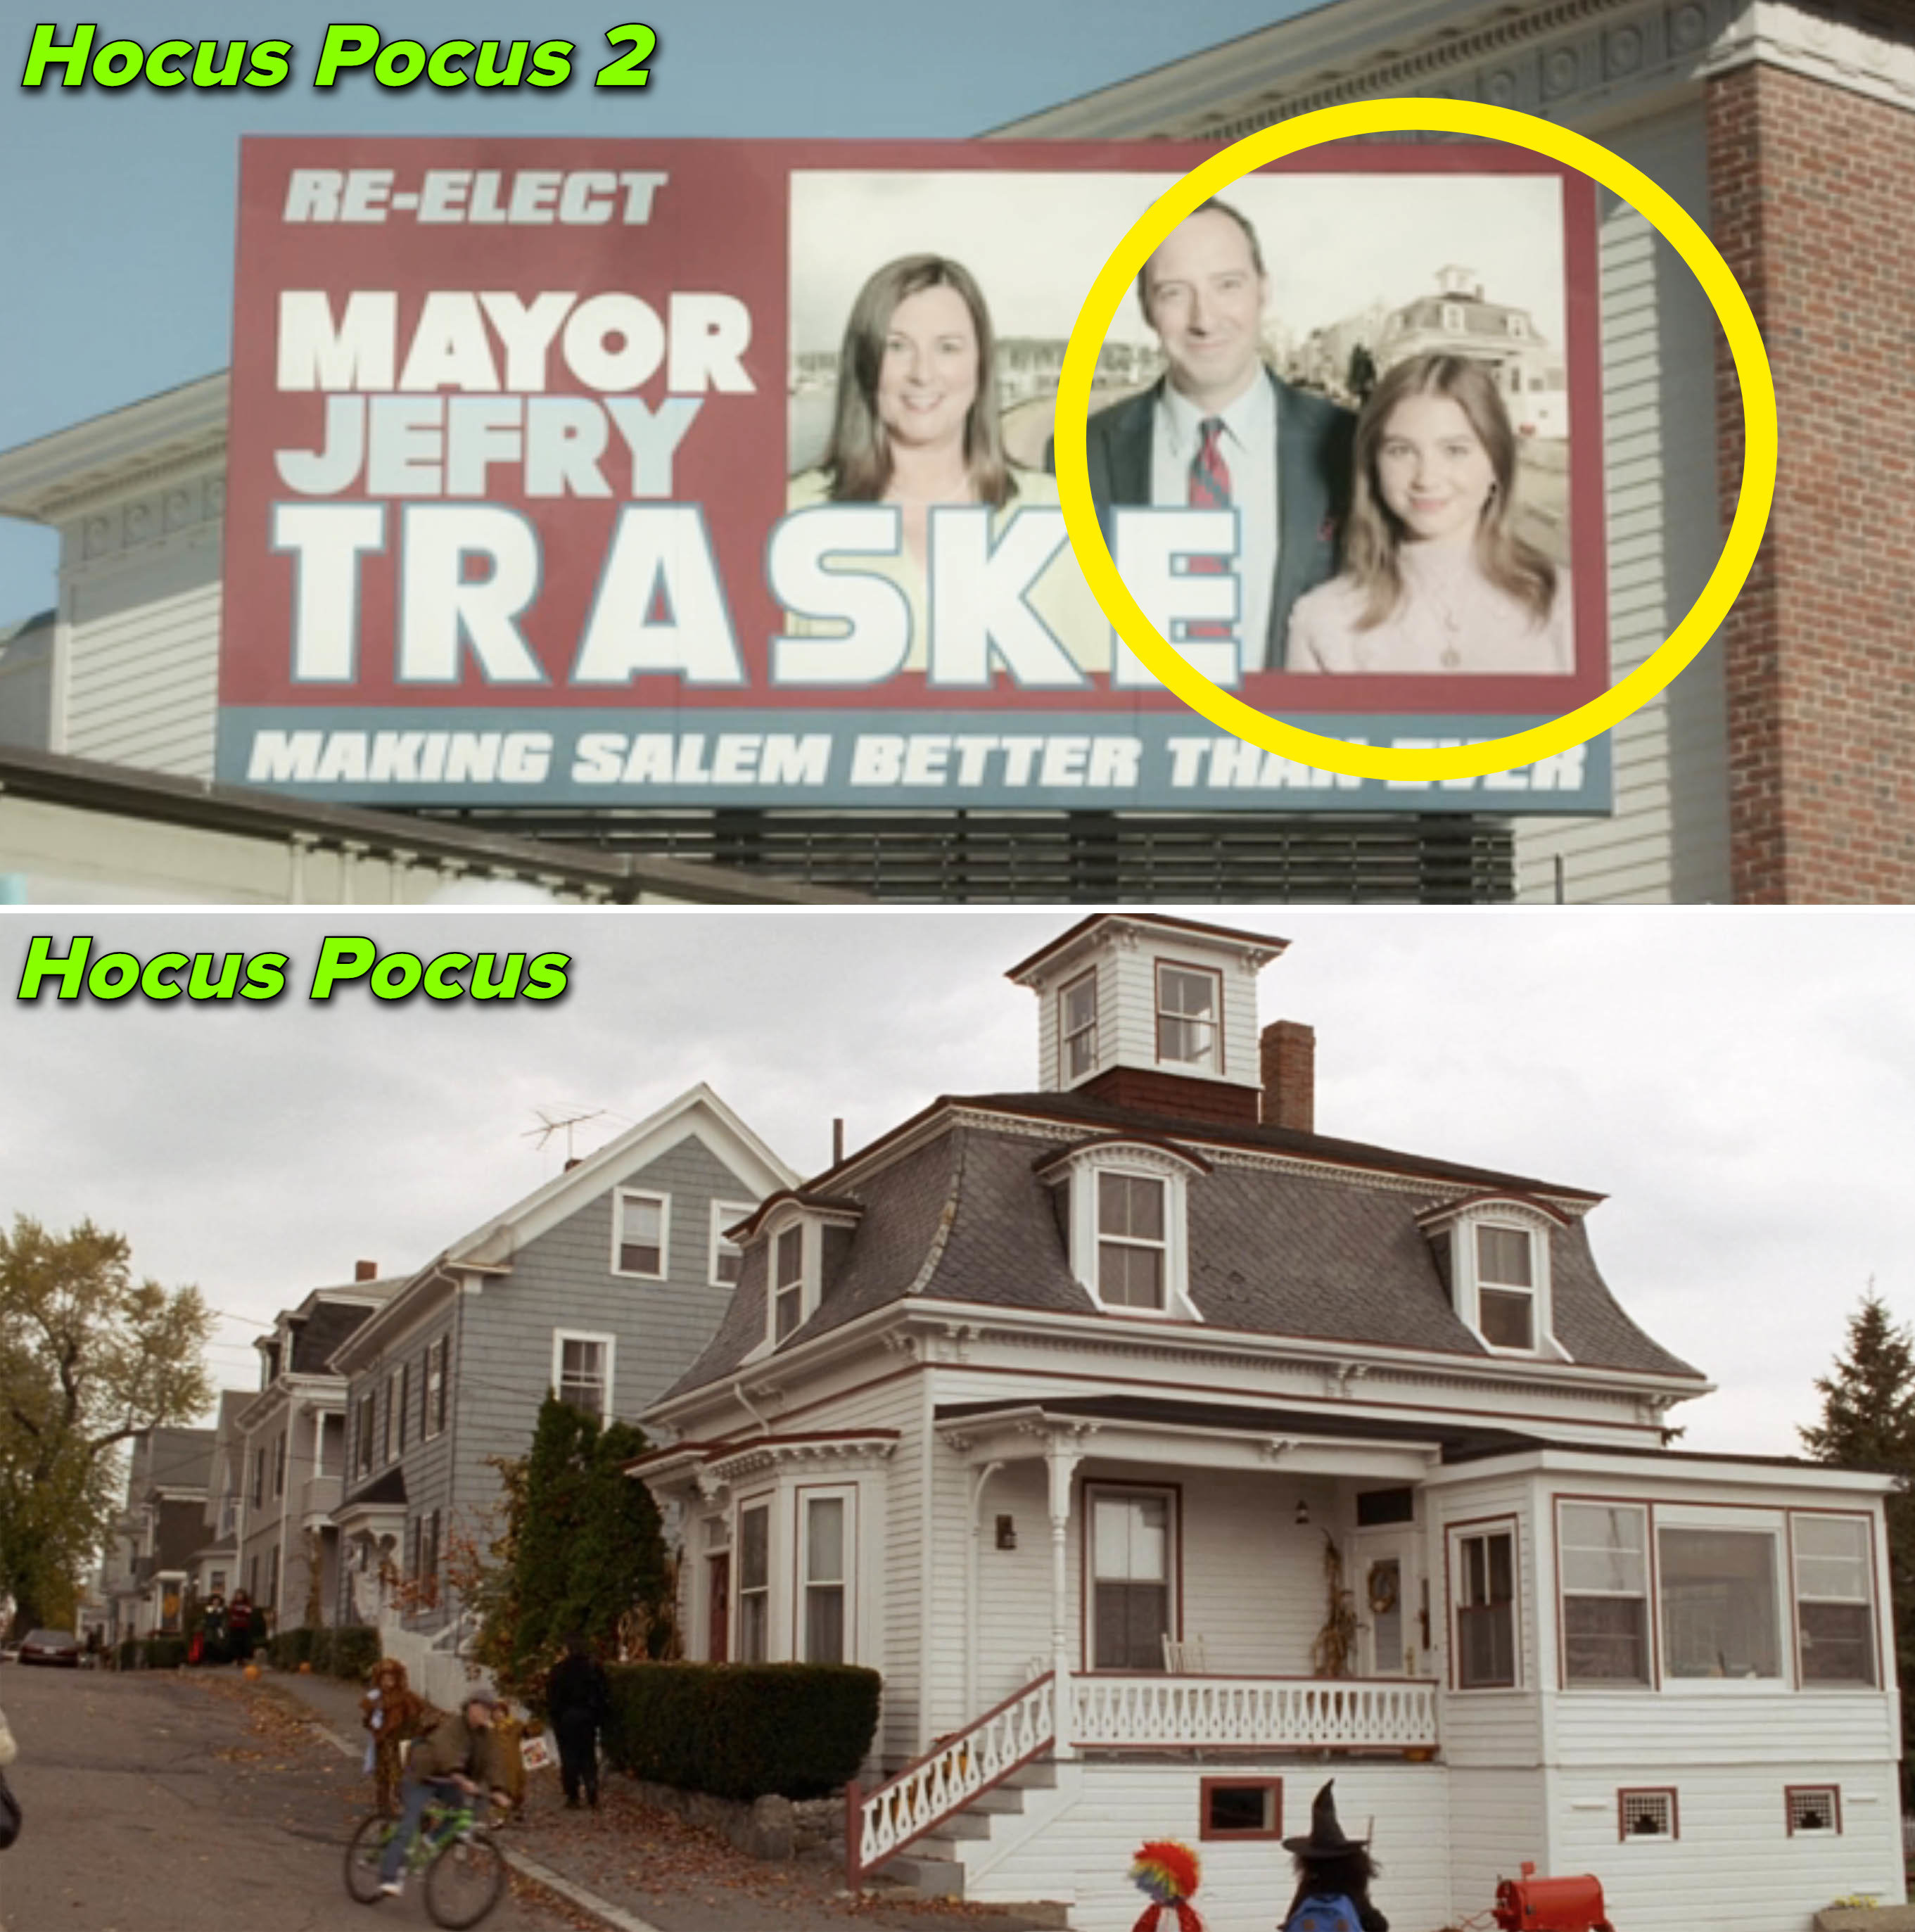 The home in the background of a political ad in Hocus Pocus 2